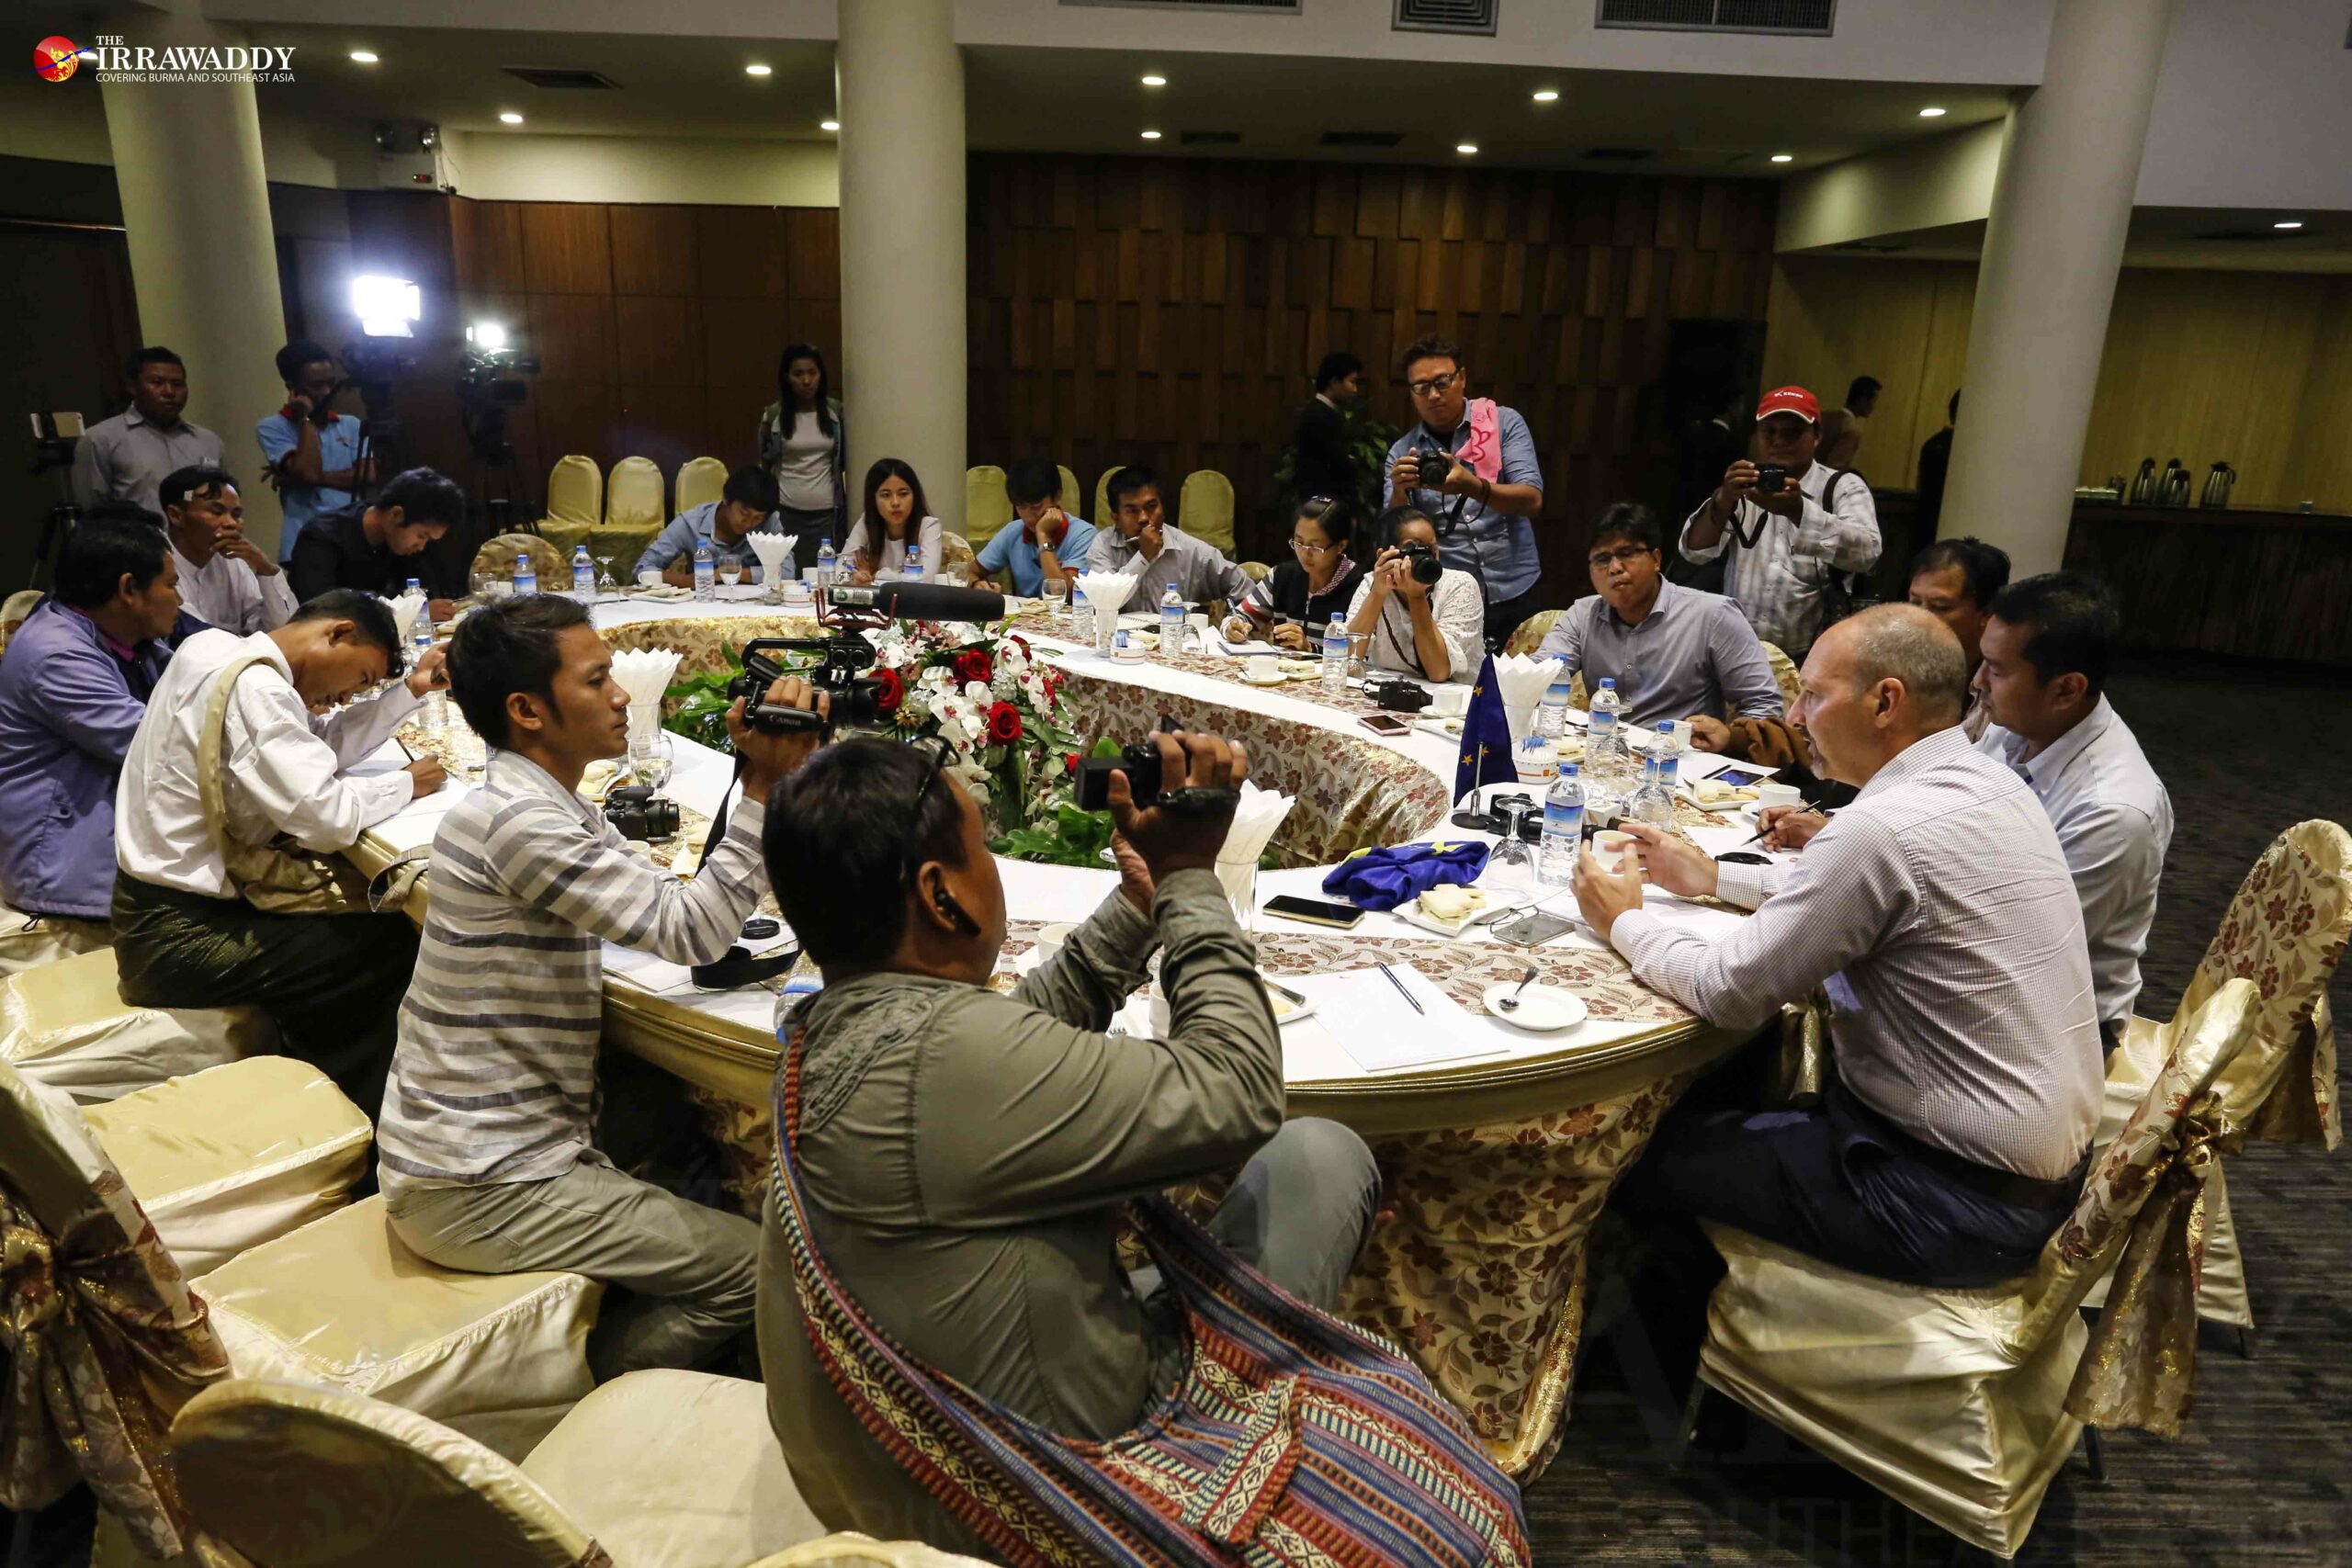 Roland Kobia speaks to journalists in Mandalay on August 23.